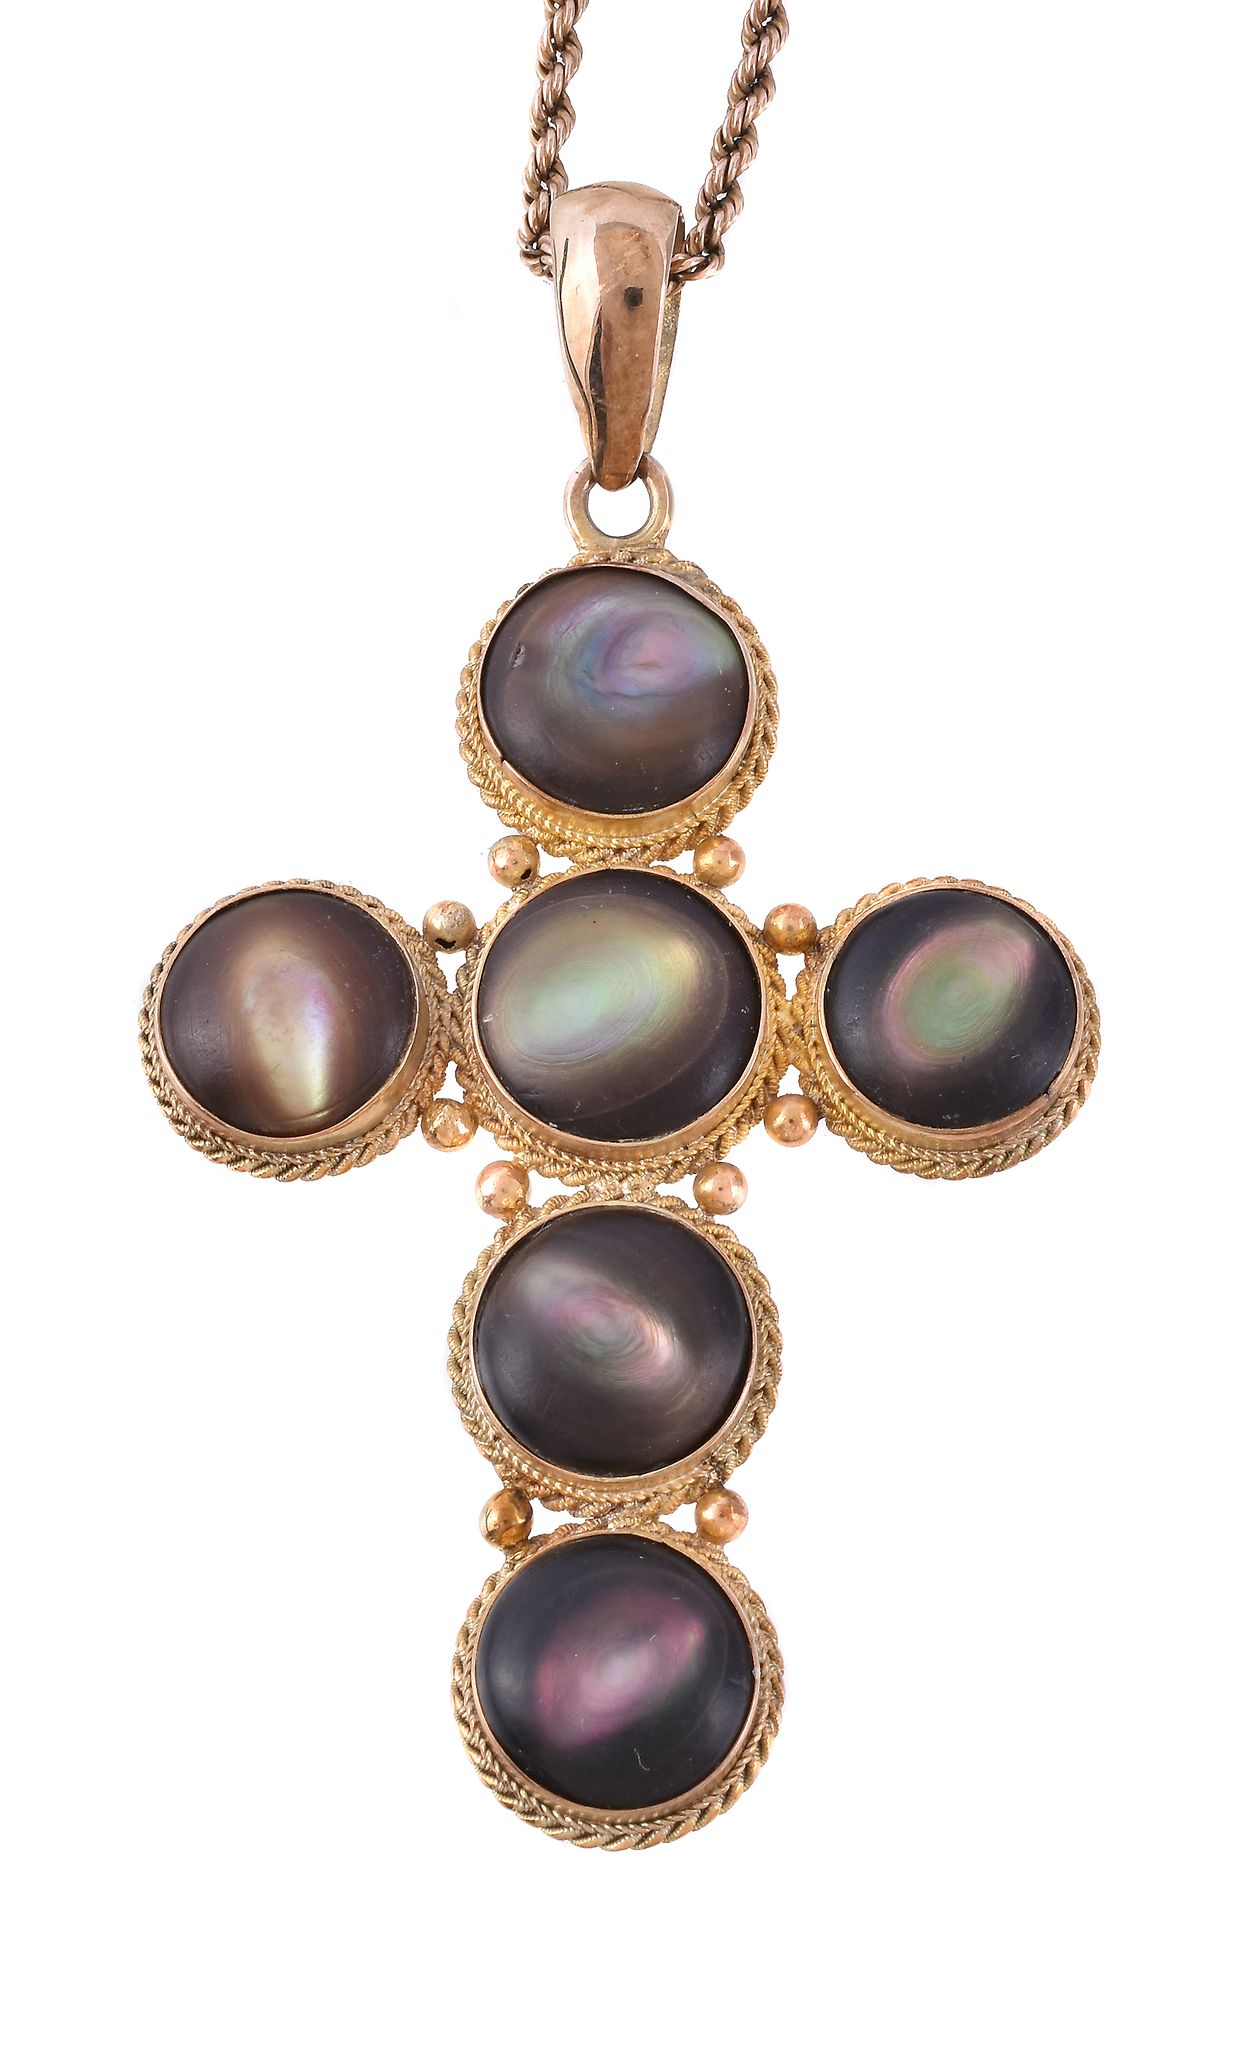 An early 20th century abalone shell cross pendant, circa 1900, the cross set with circular abalone